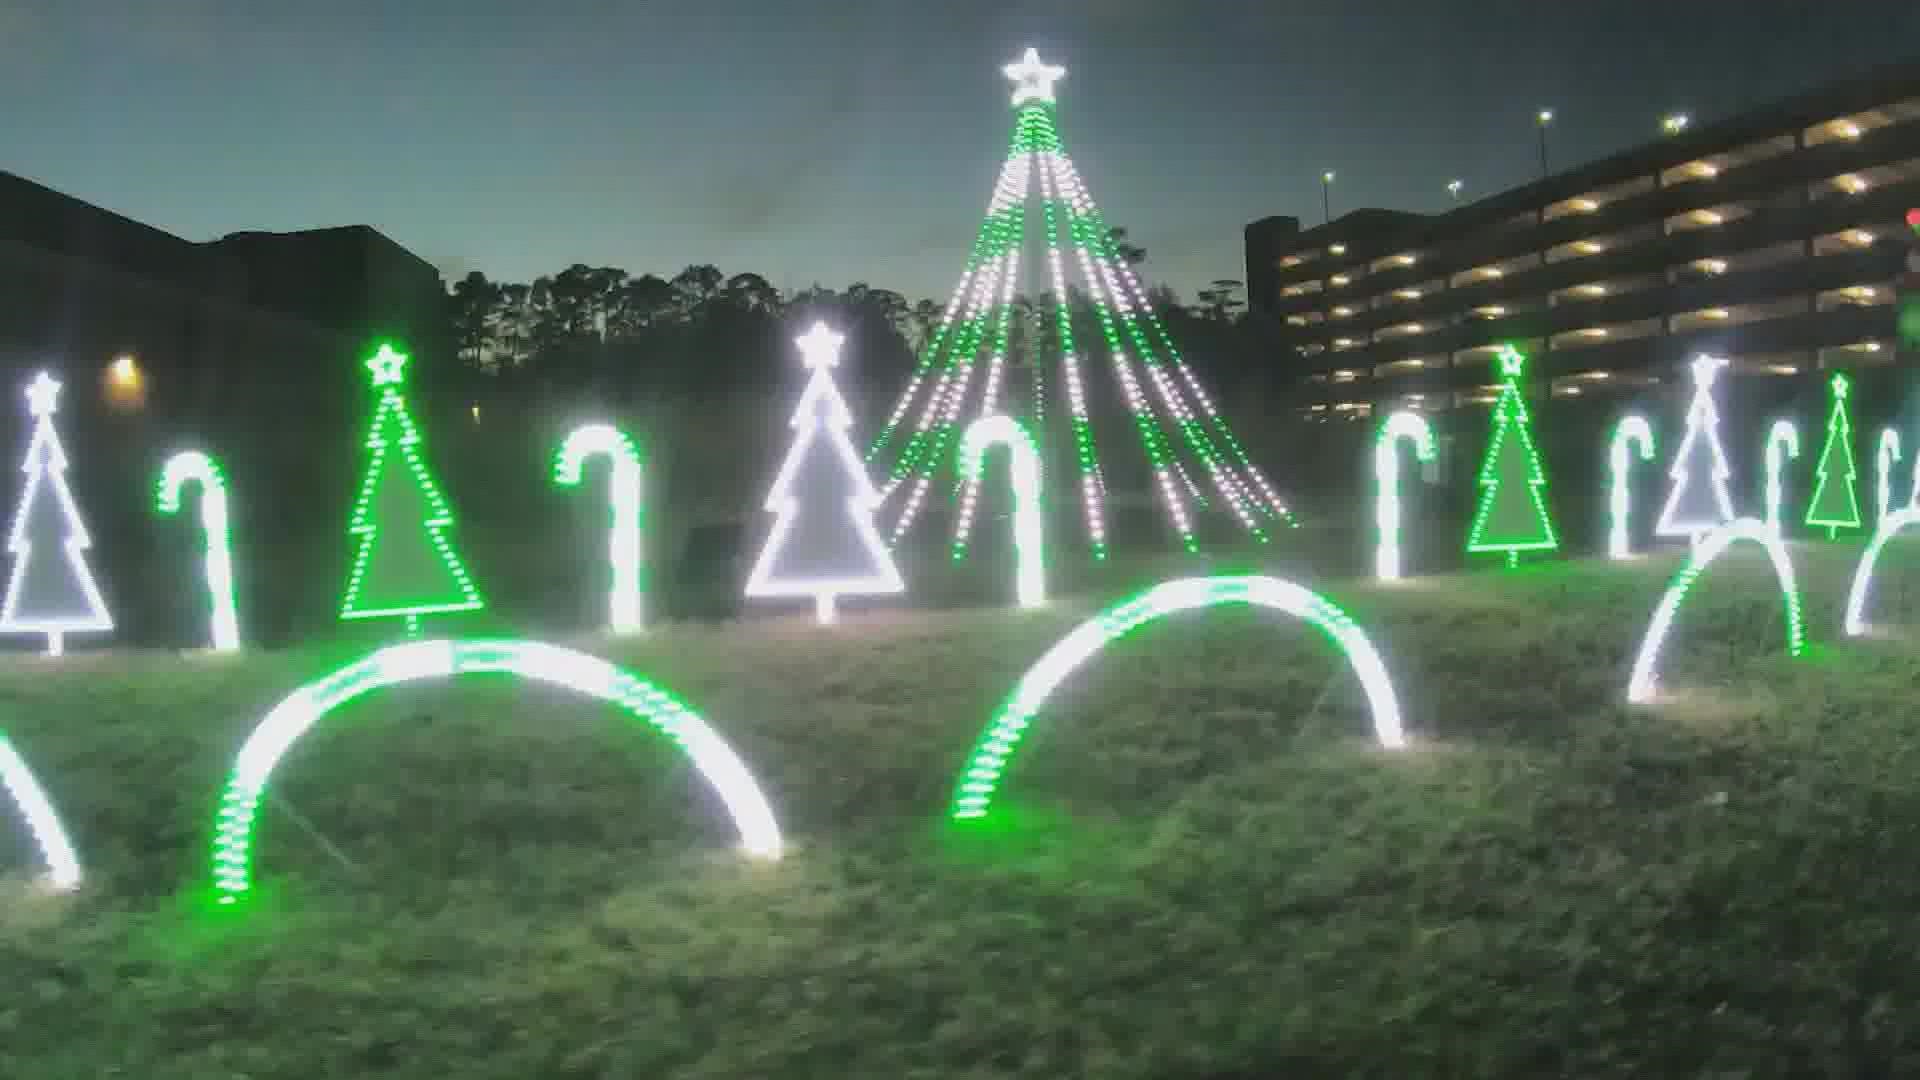 Frankie To-Ong made the light show as gift for patients and a "thank you" to the Woodlands hospital. Reporter Melissa Correa shares his story behind the lights.